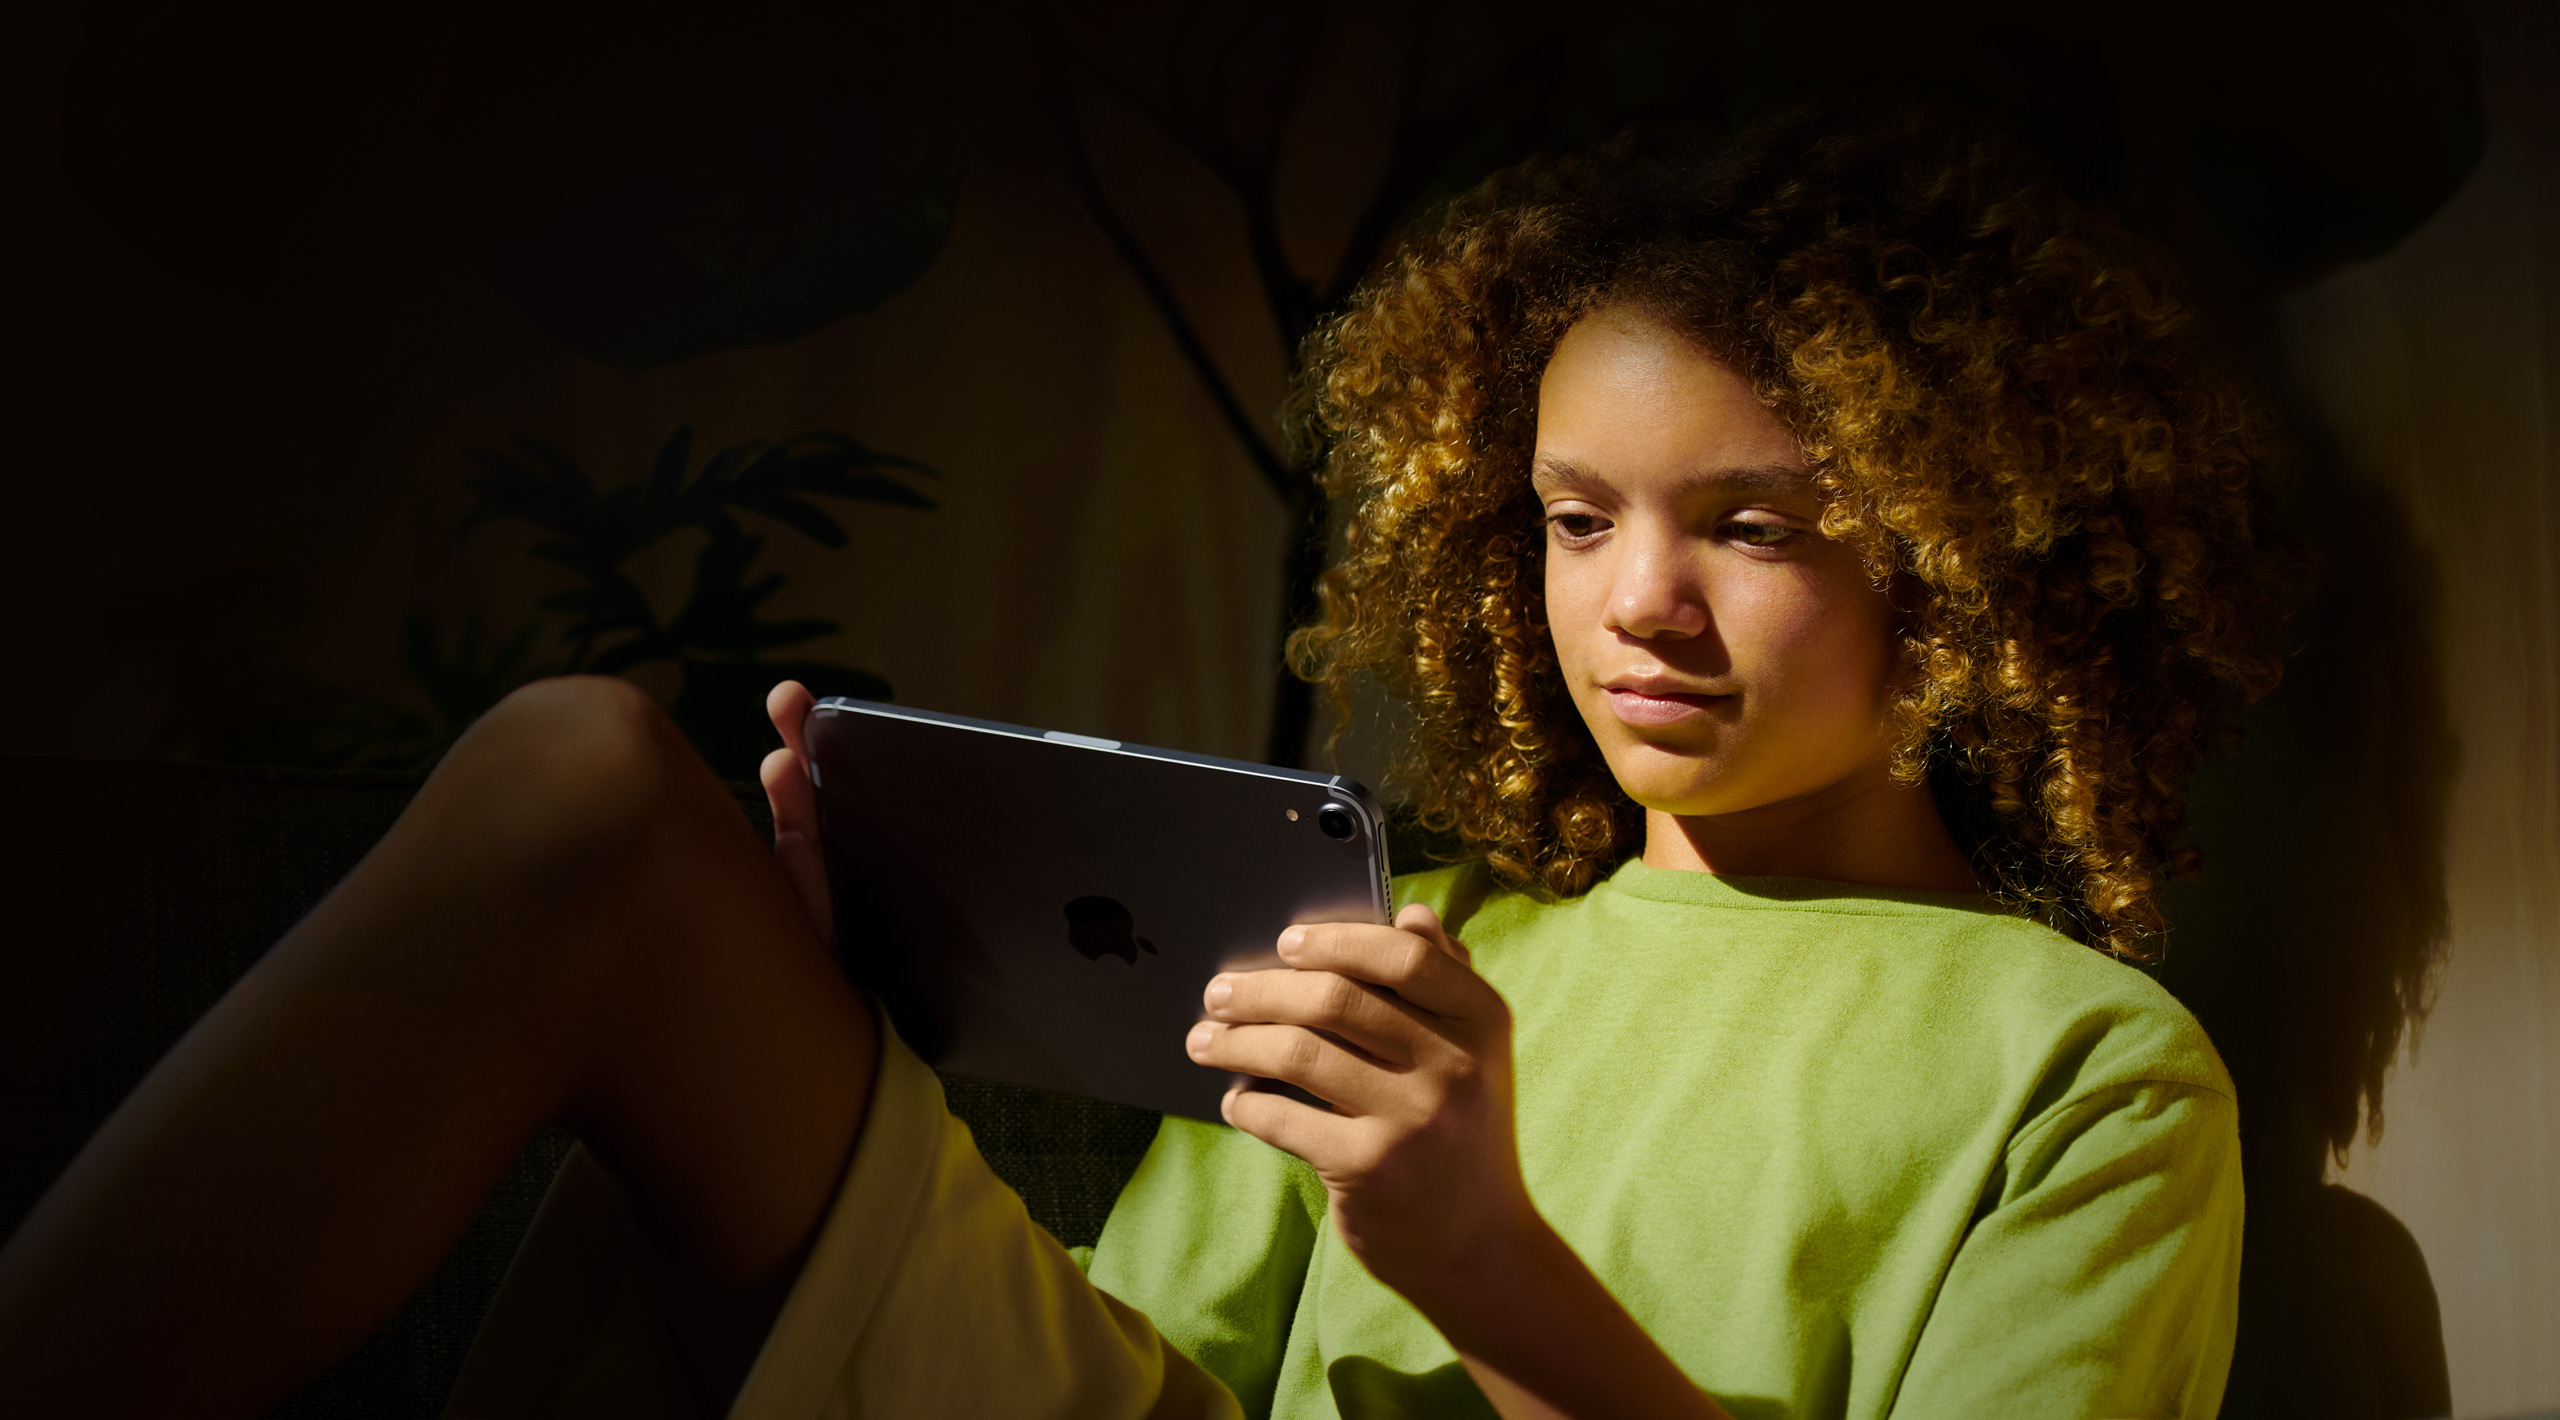 The best strategies to prevent your child from using a phone